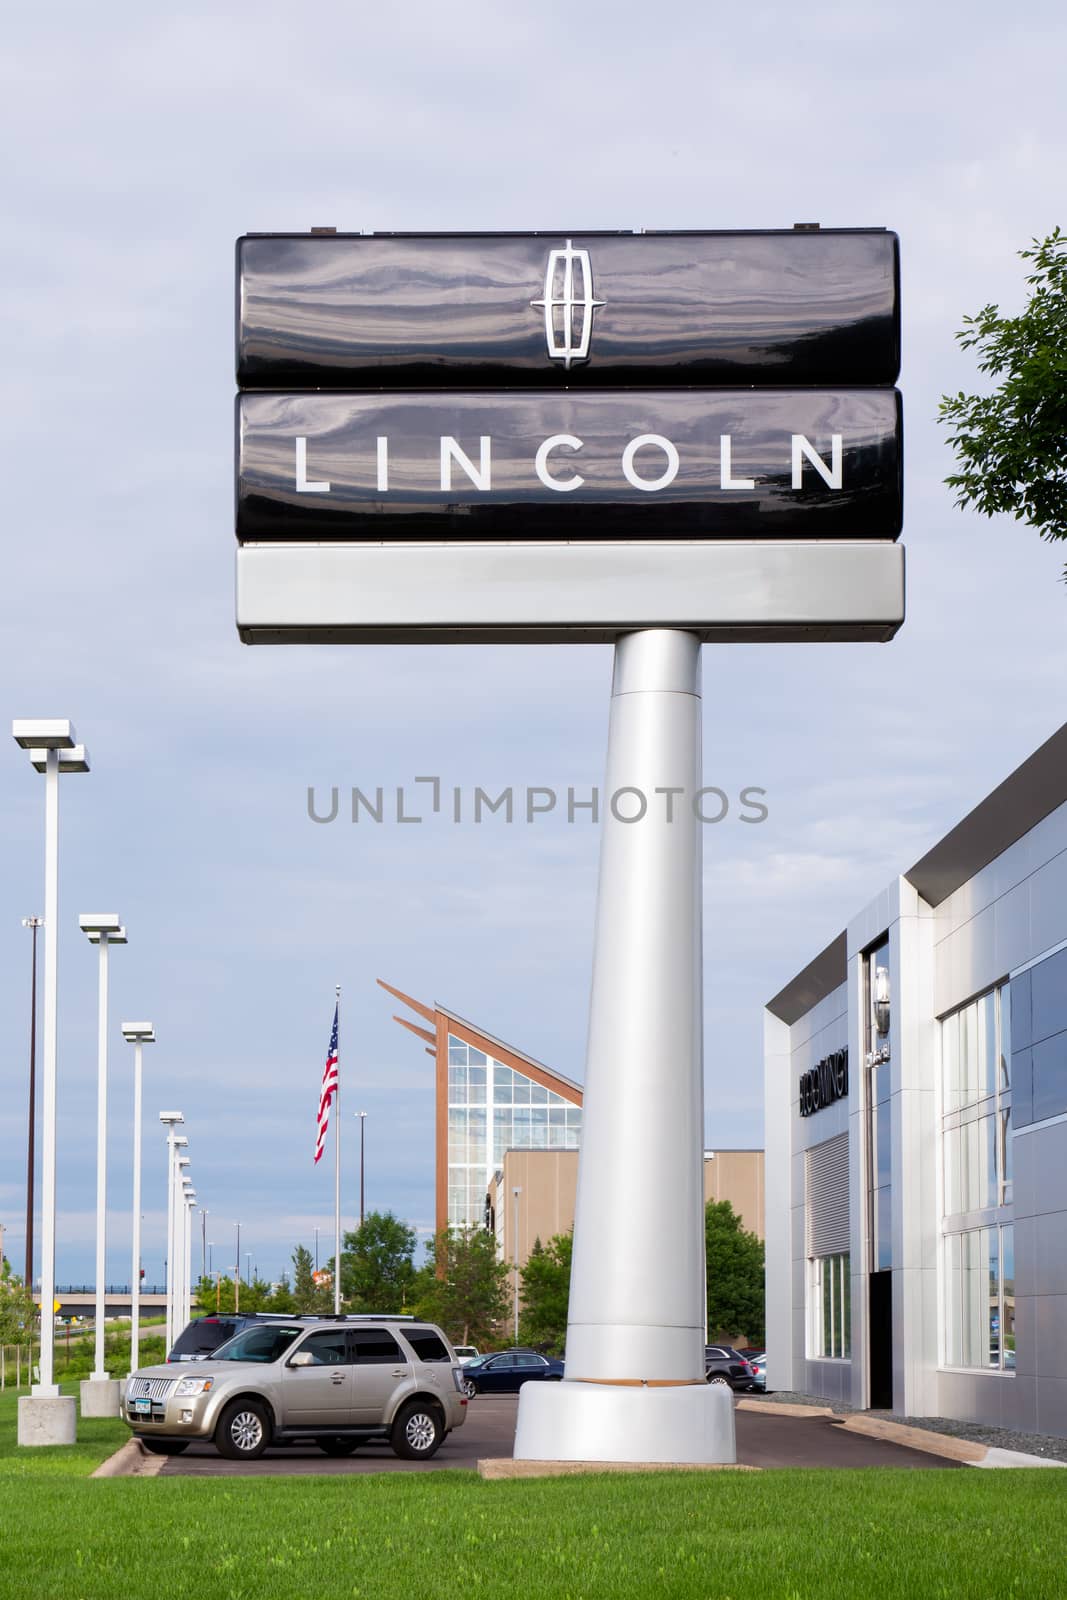 BLOOMINGTON, MN/USA - JUNE 22, 2014: Lincoln automobile dealership exterior. Lincoln is a division of the Ford Motor Company that sells luxury vehicles under the Lincoln brand.